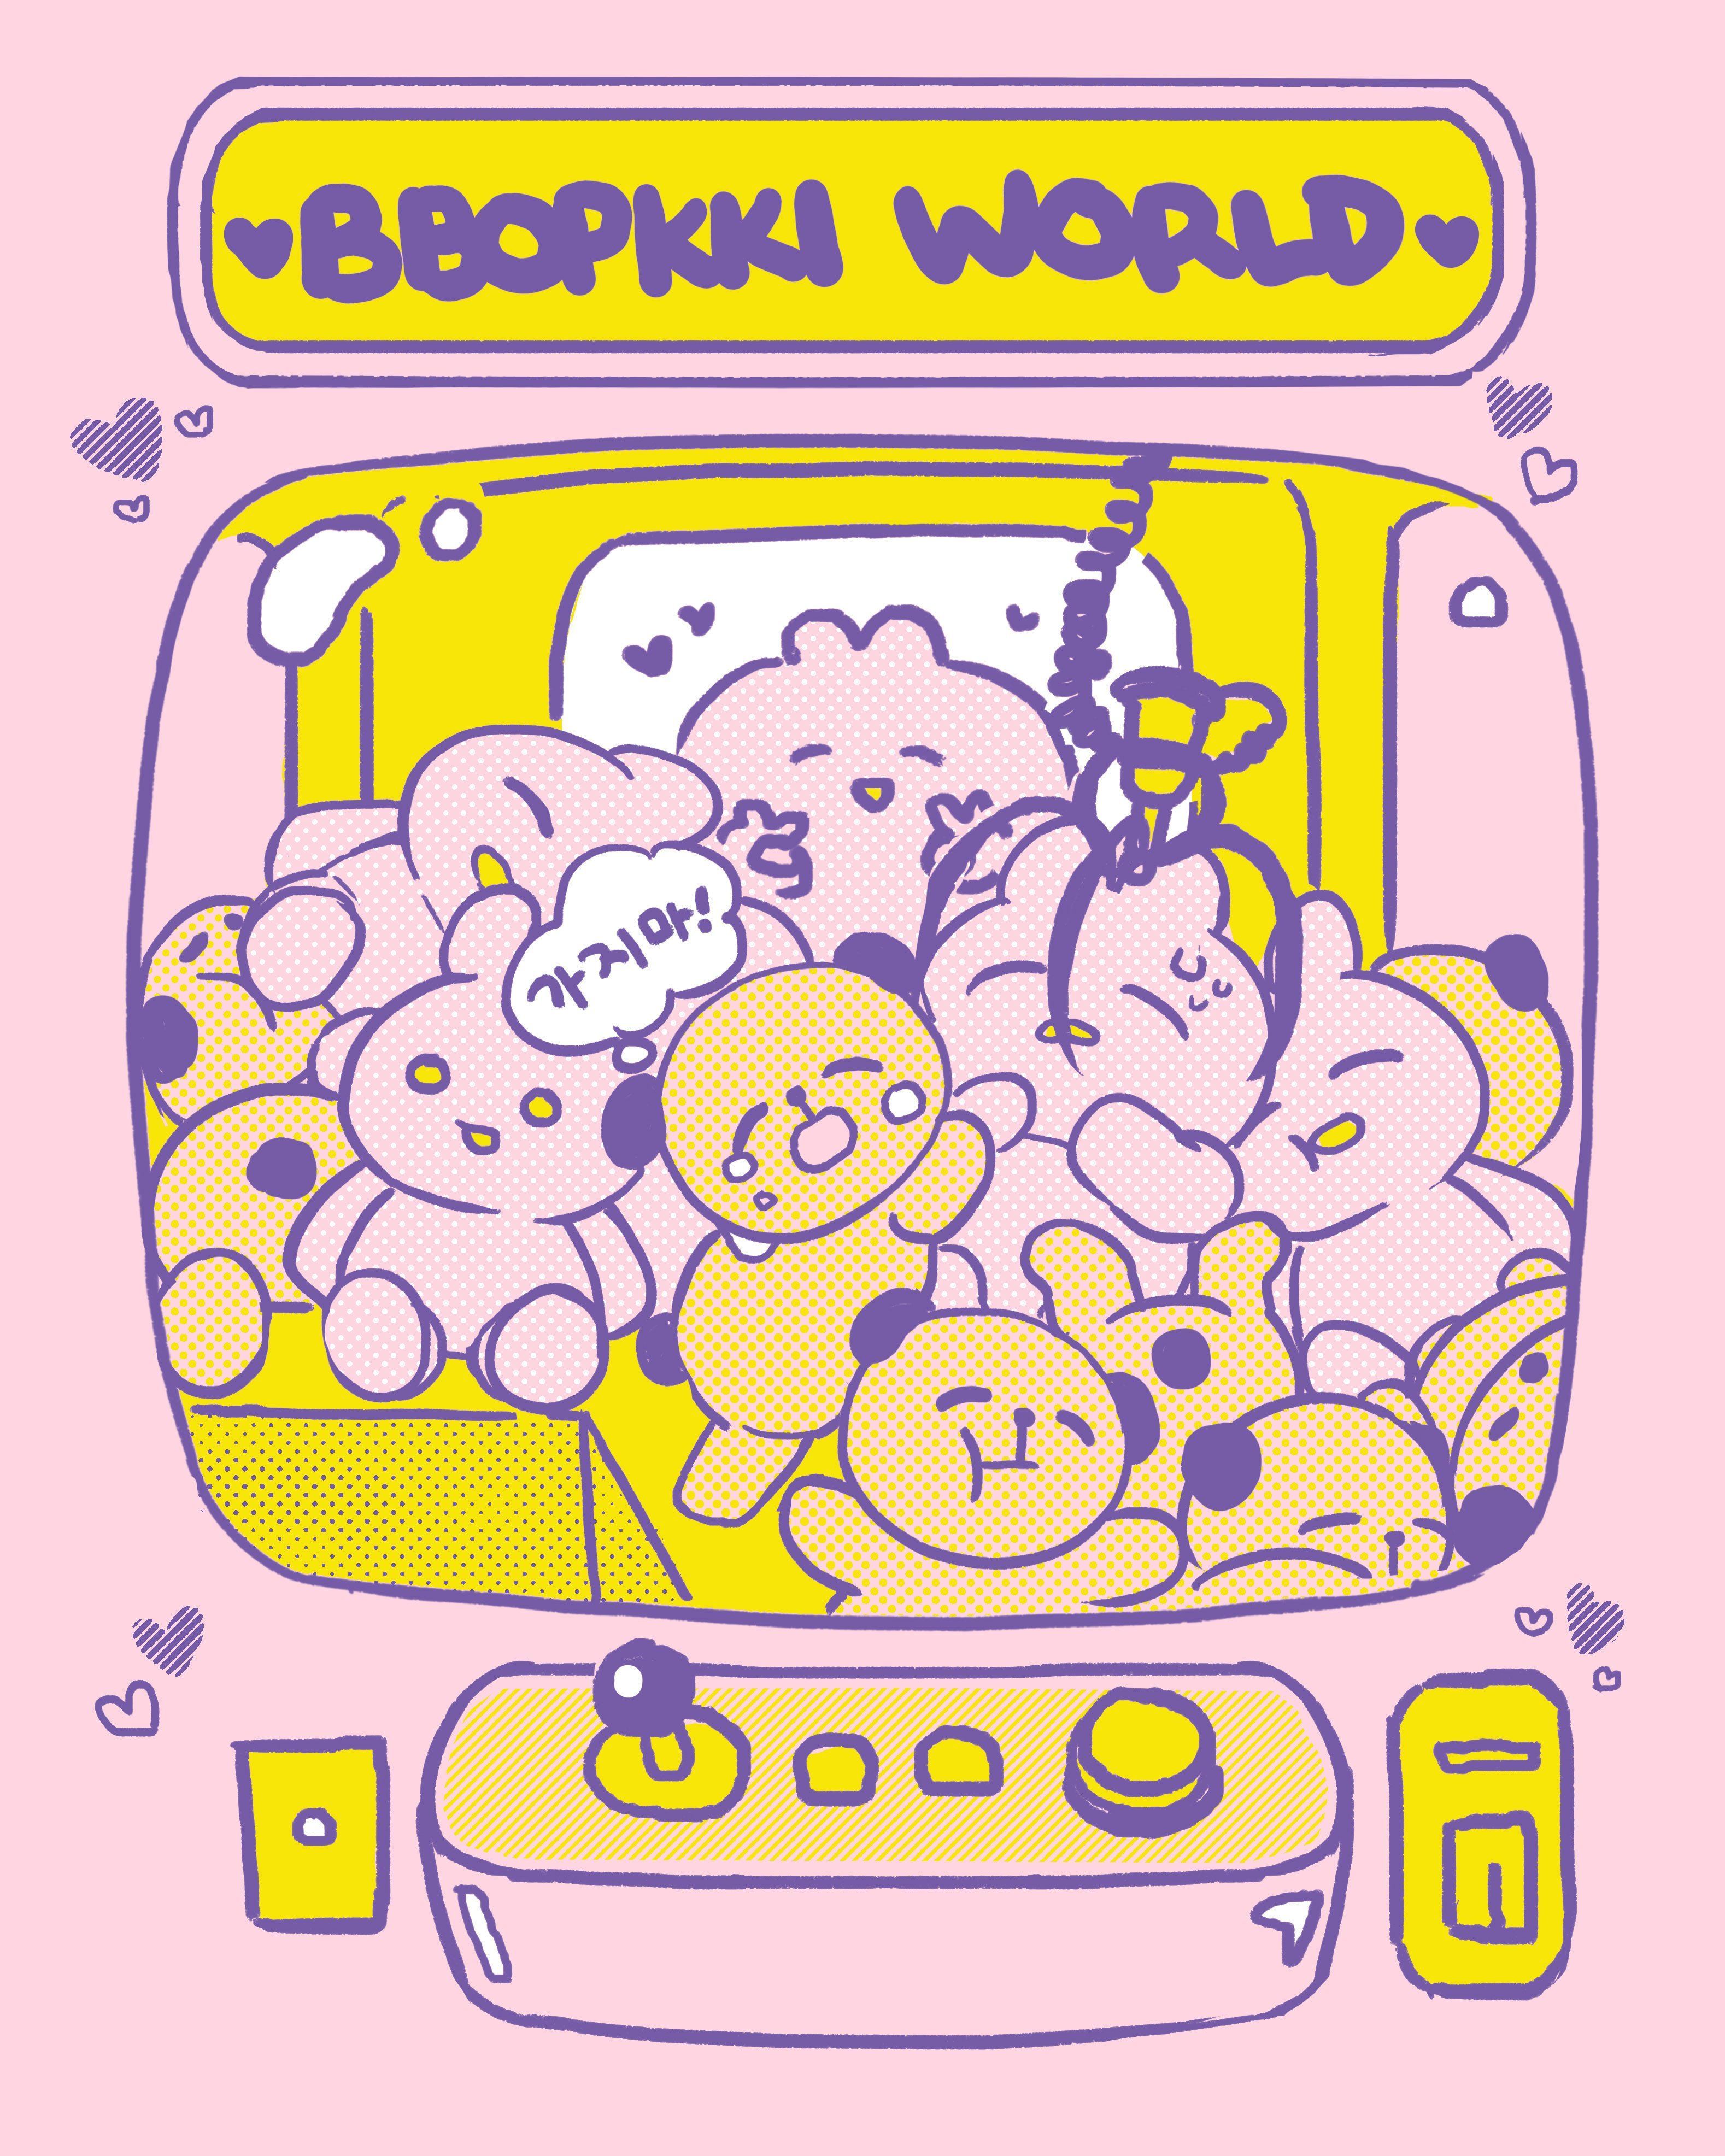 A Mini Drama Unfolds At The Crane Game Machine. A Little Dog Plush Cries, Don't Go! As His Friend Is Caught By. Crane Game, Cute Illustration, Animation Design